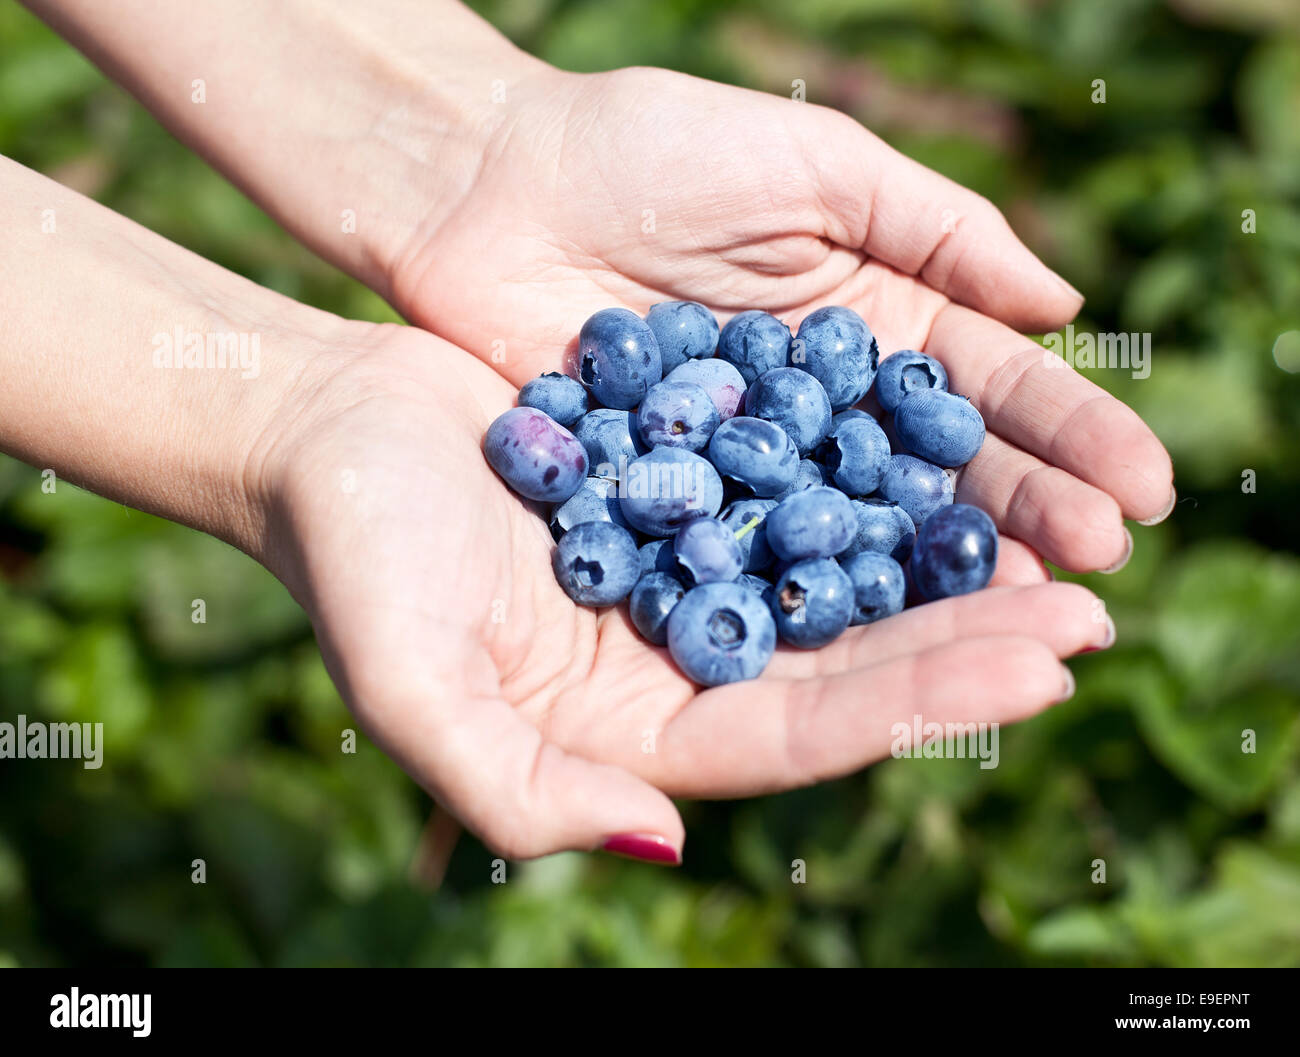 Blueberries in the woman's hands. Blurred green shrubs on the background. Stock Photo